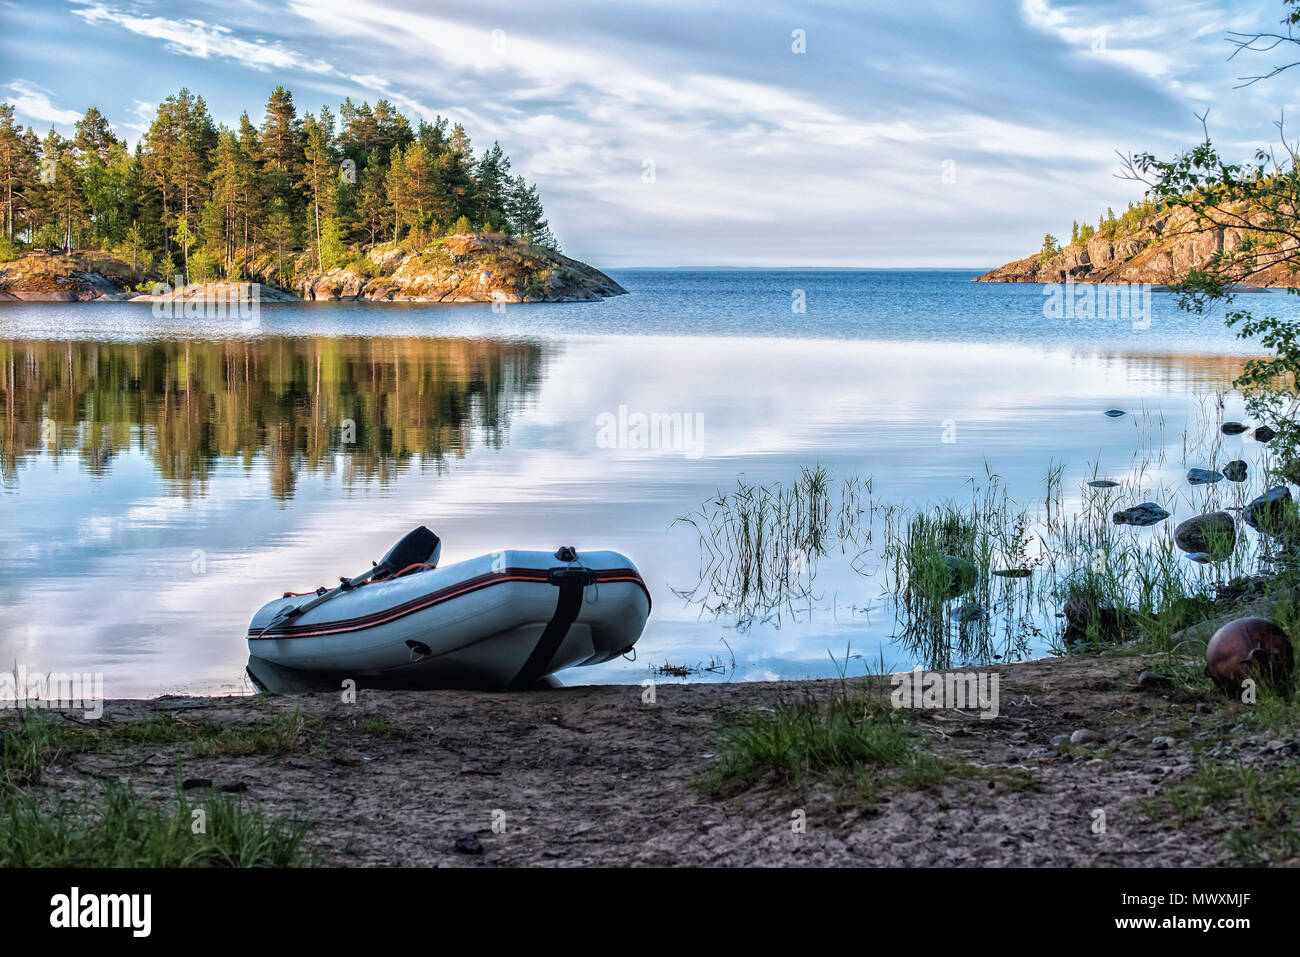 Morning at the uninhabited wild beach. Empty inflatable boat with motor and oars at the coastline. Summer season. Selective focus. Active tourism conc Stock Photo